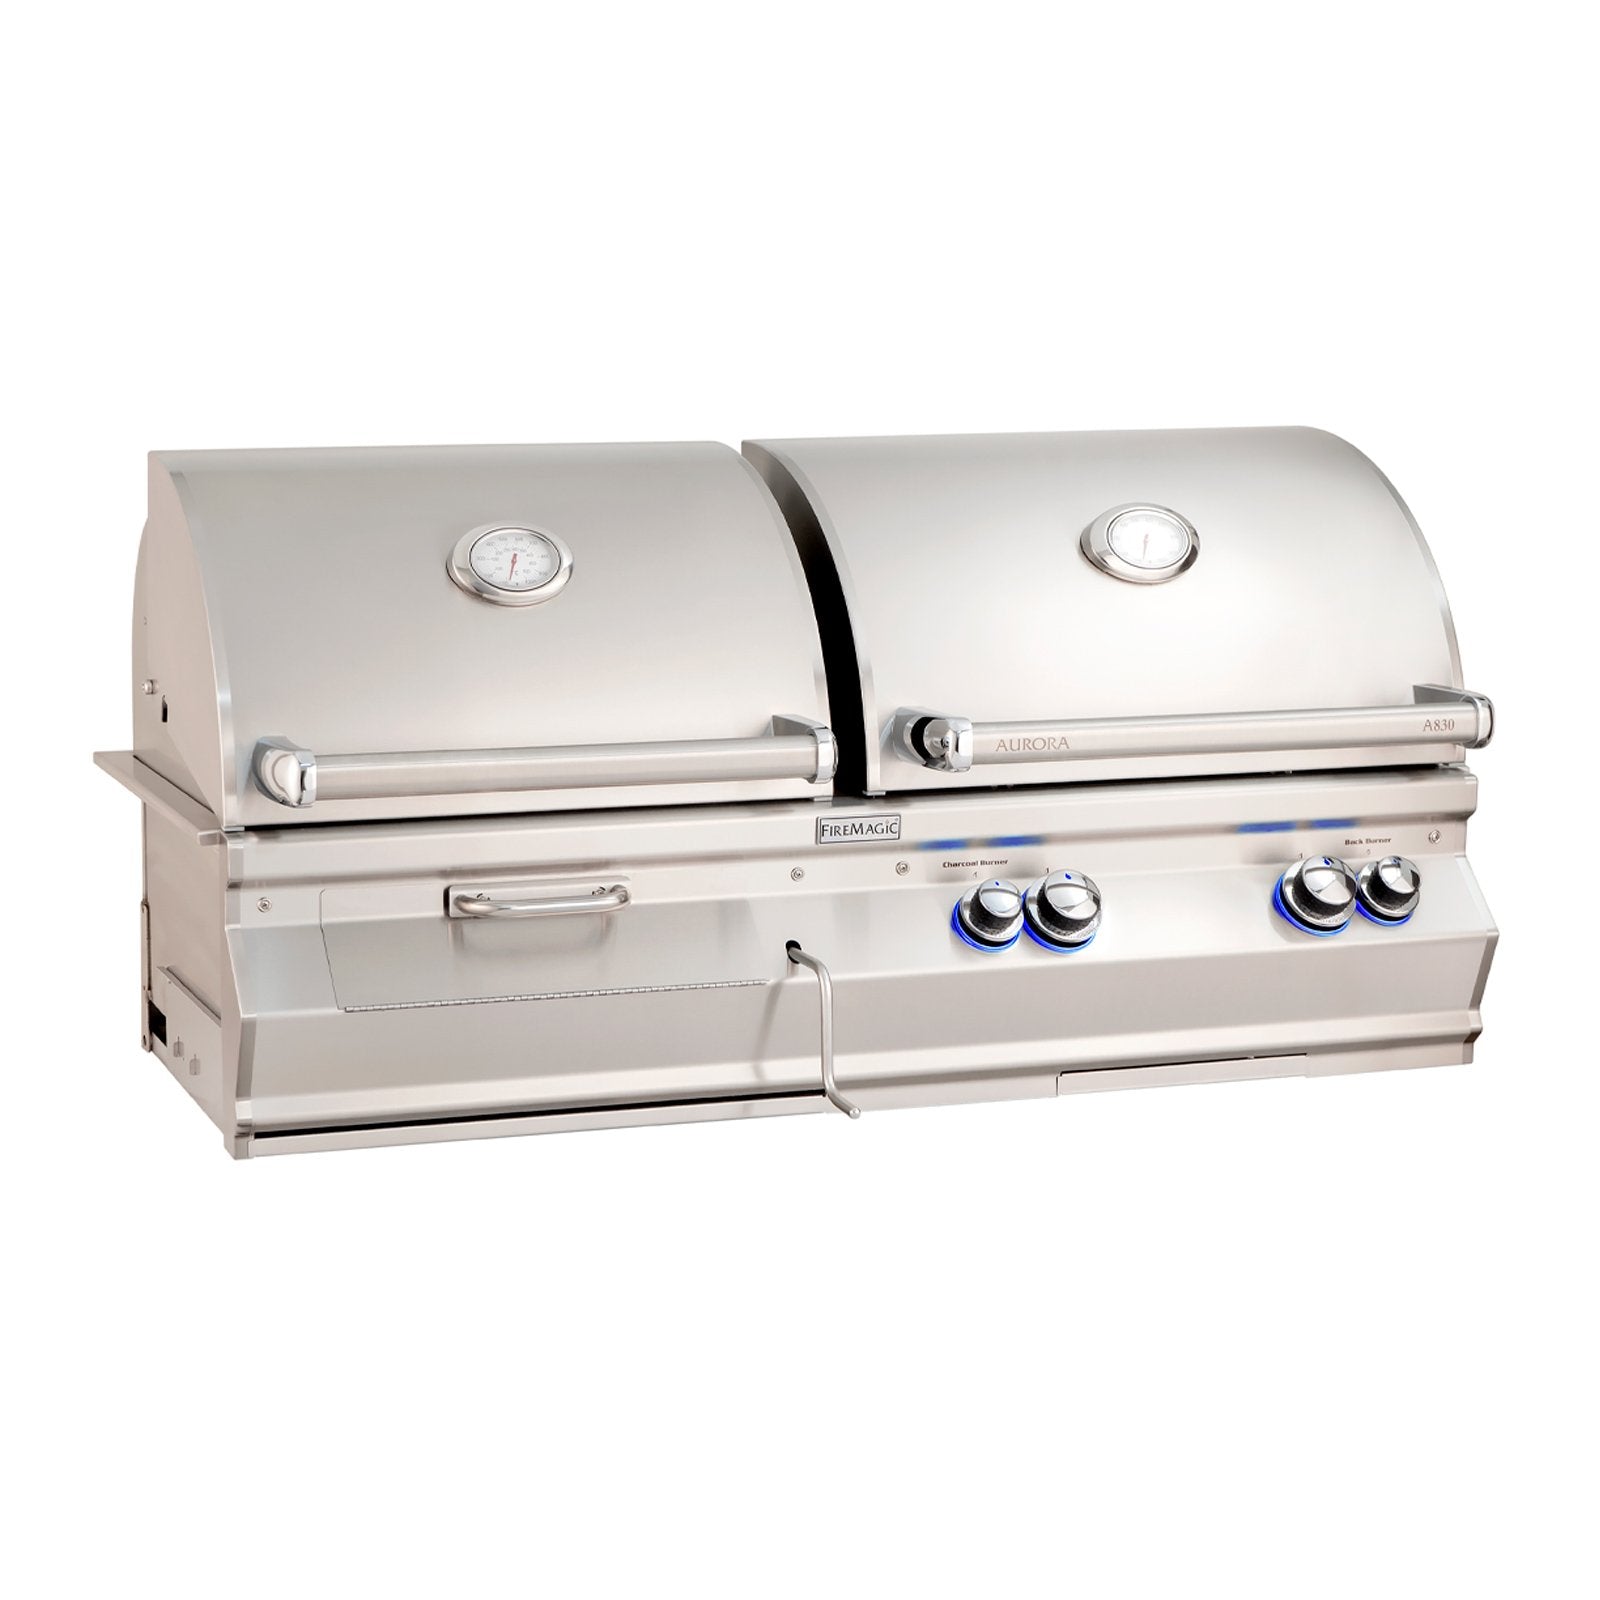 fire-magic-a830s-46-inch-gas-and-charcoal-built-in-combo-grill-w-infrared-burner-analog-therm-a830i-7lan-cb 1